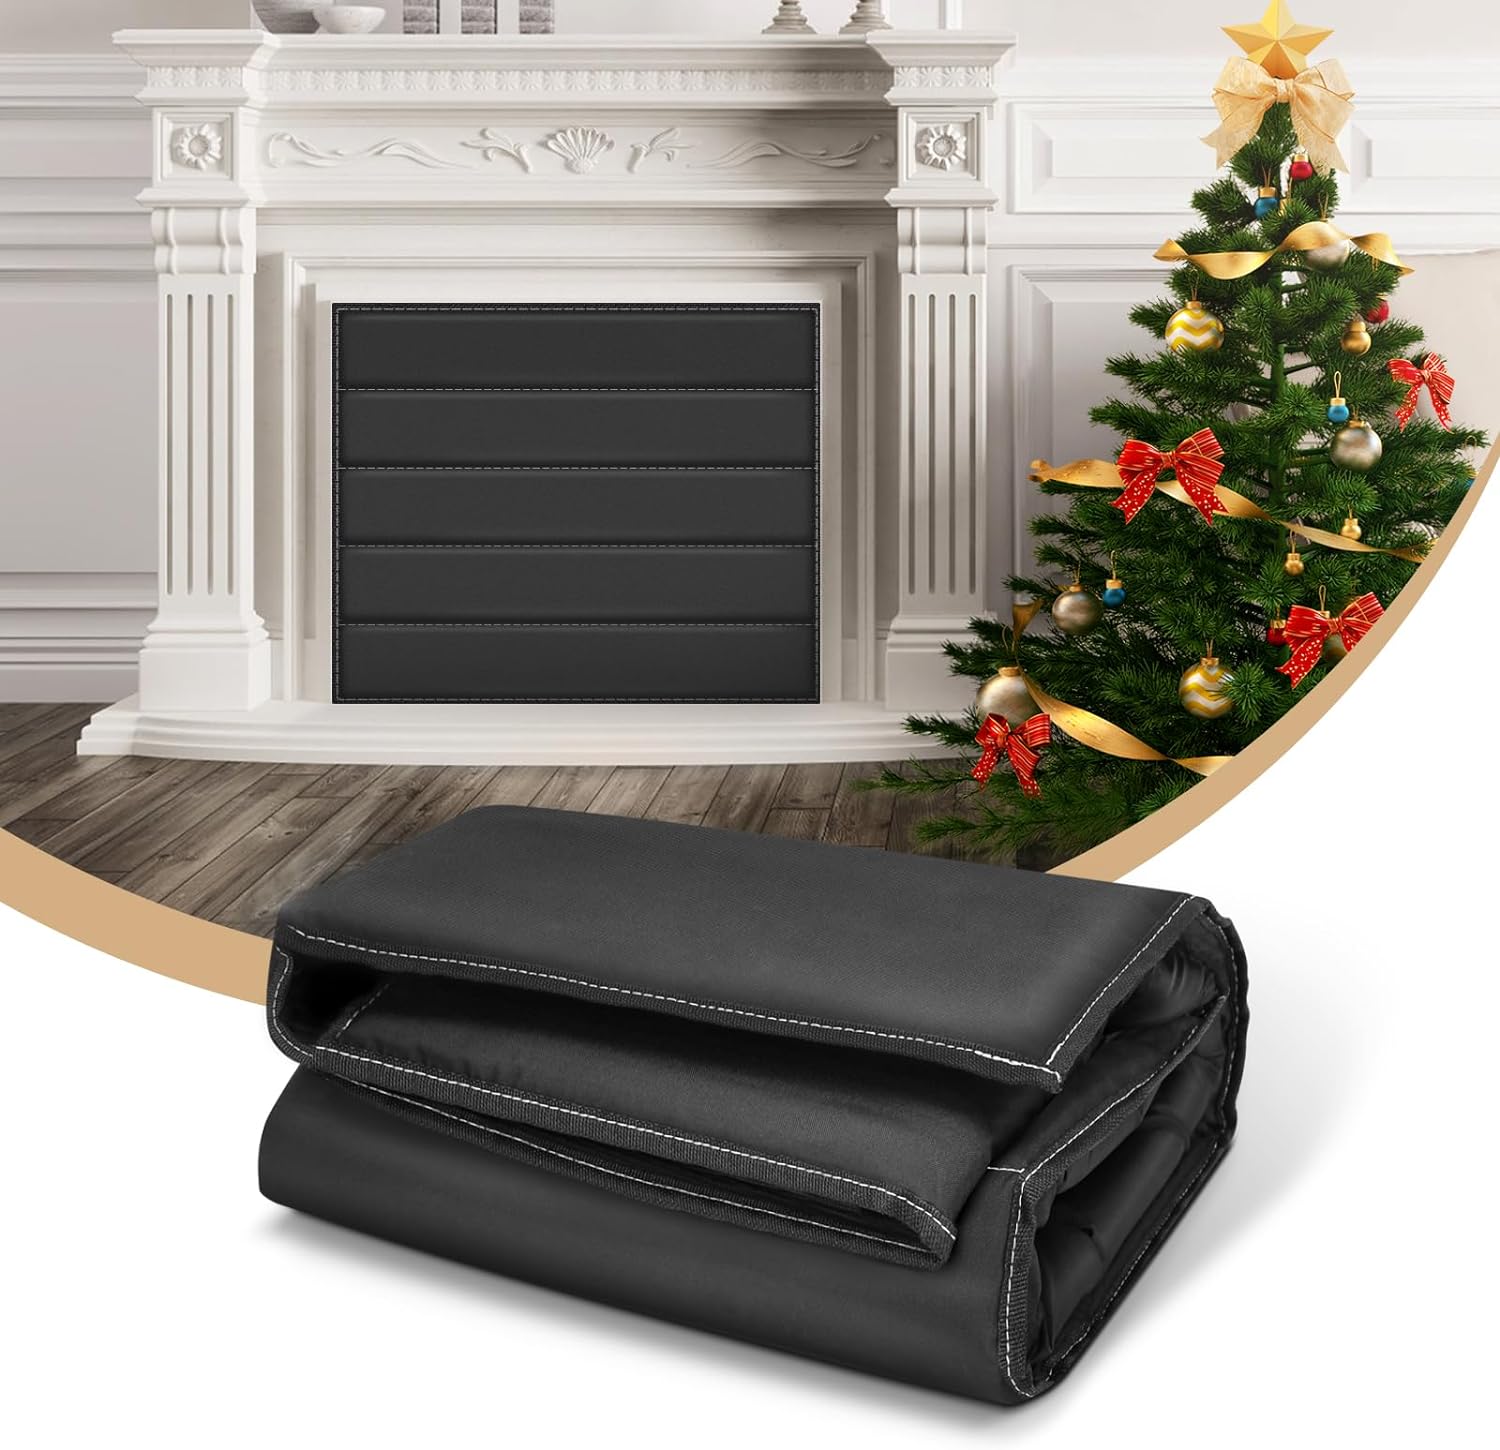 Fireplace Blocker Blanket, Fireplace Draft Stopper Save Energy/Fire Place  Cover